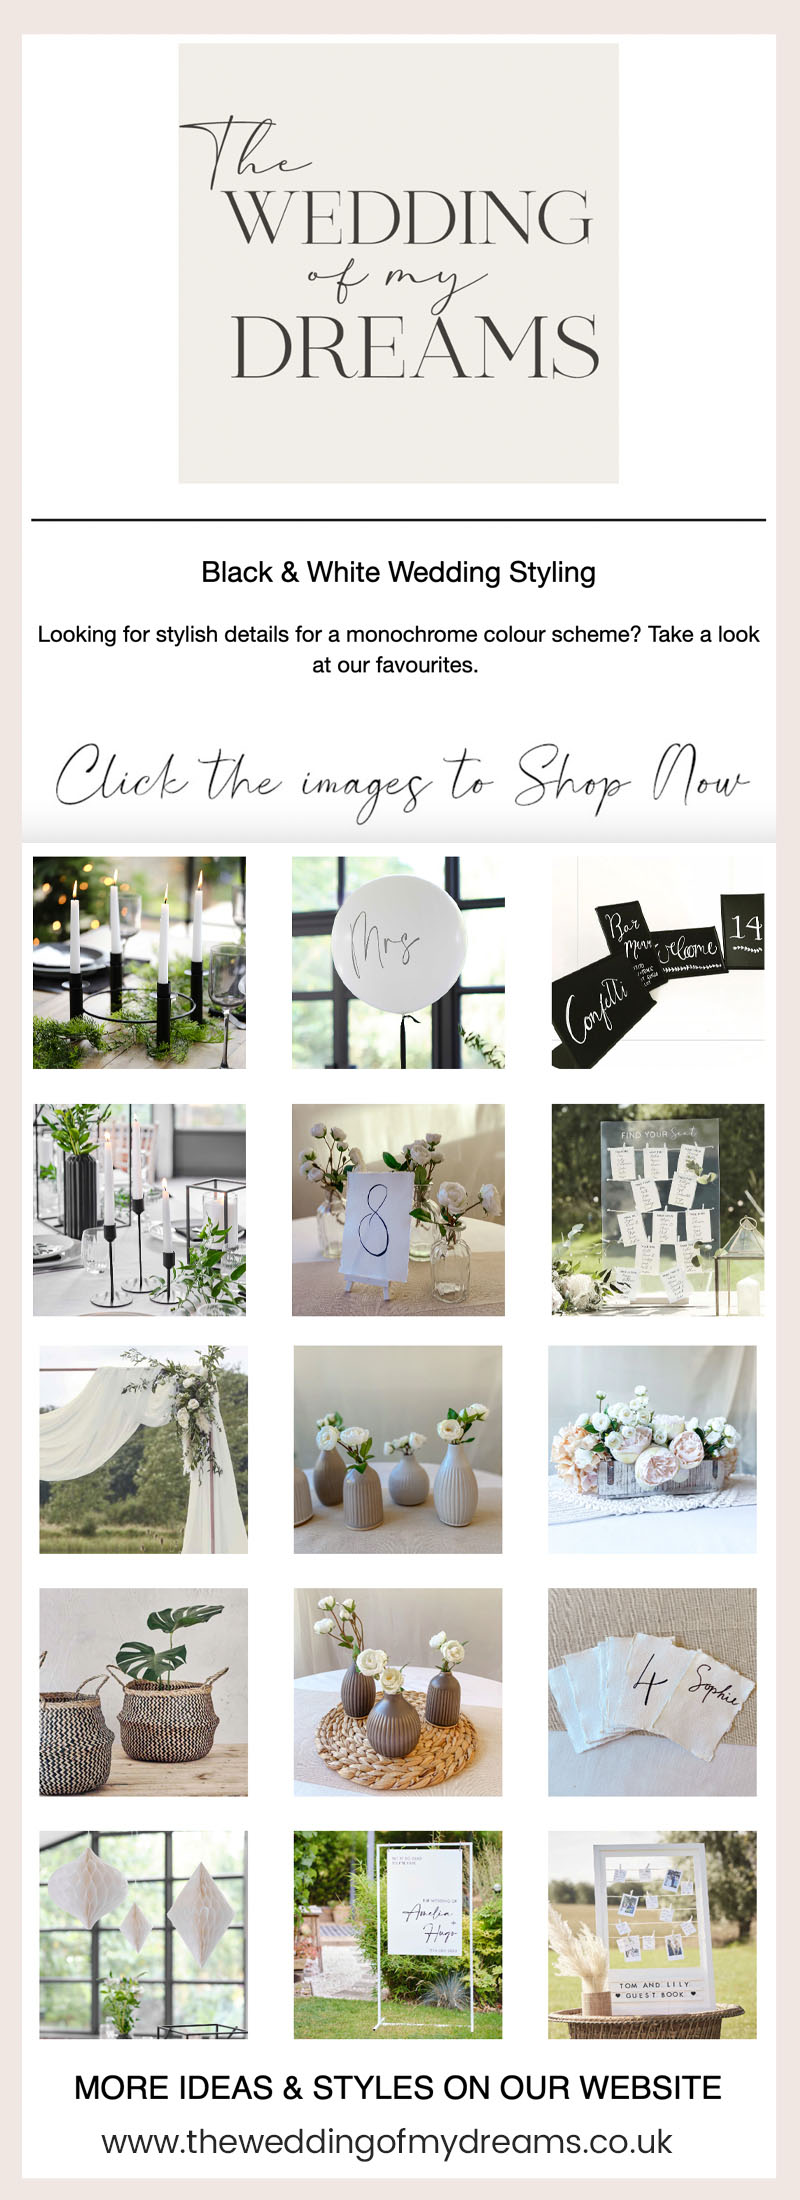 
black-and-white-wedding-table-decorations-styling-ideas